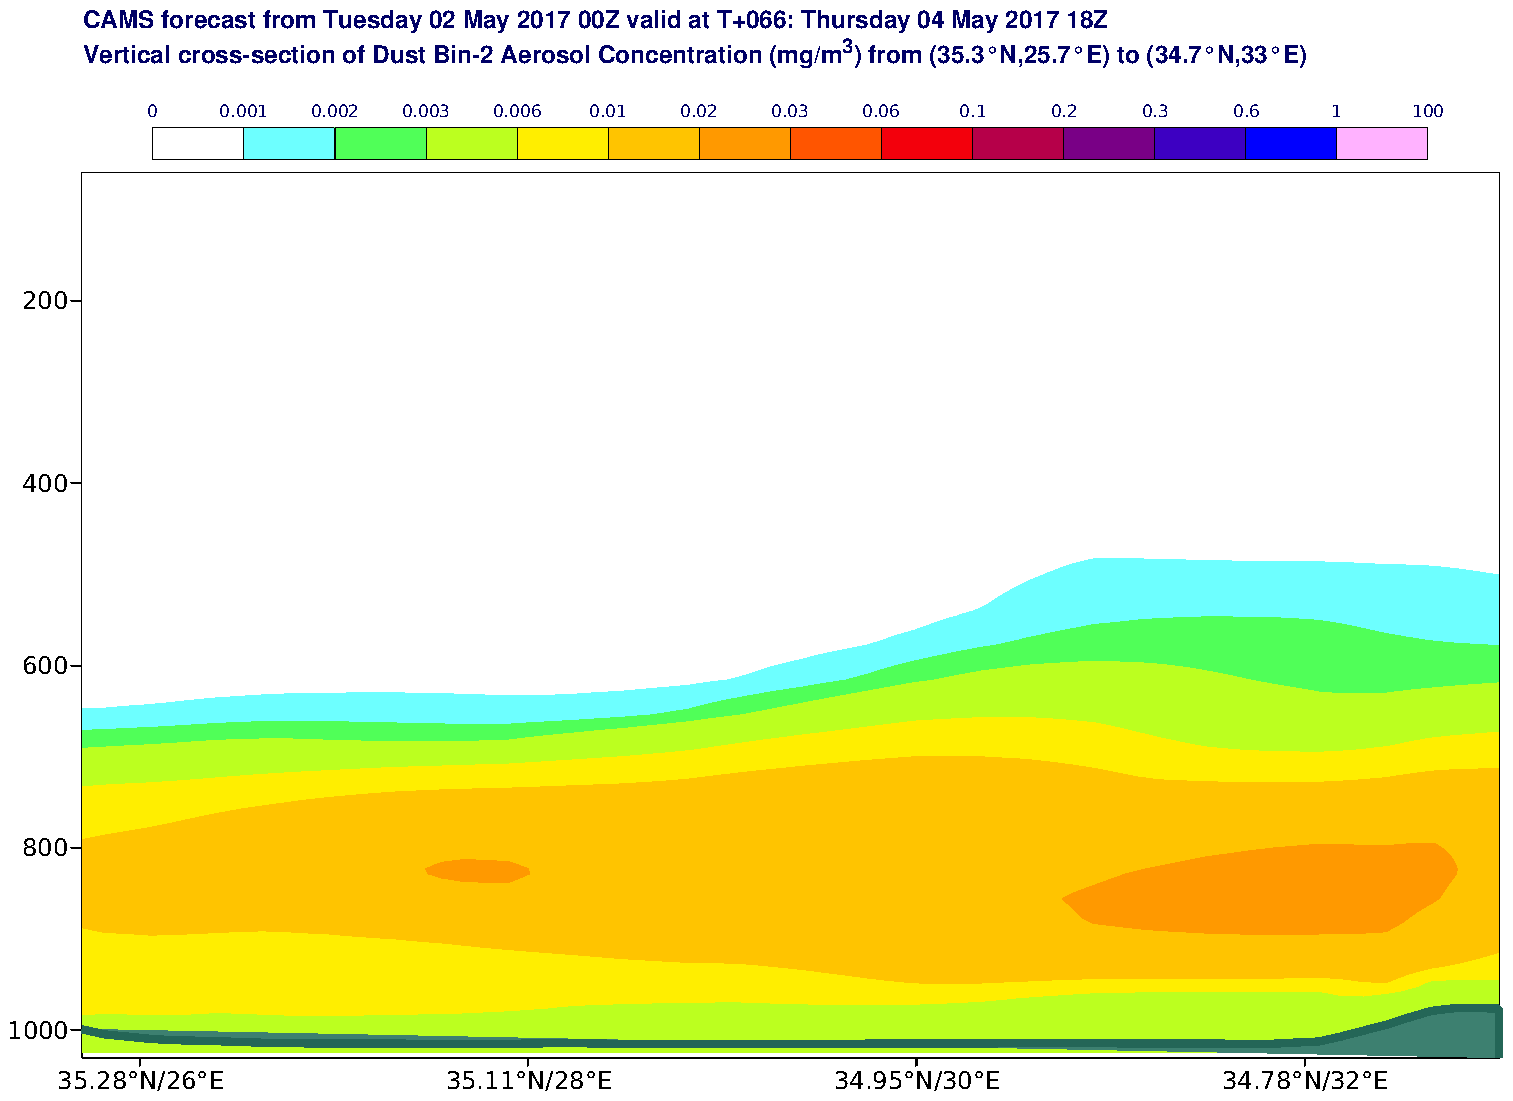 Vertical cross-section of Dust Bin-2 Aerosol Concentration (mg/m3) valid at T66 - 2017-05-04 18:00